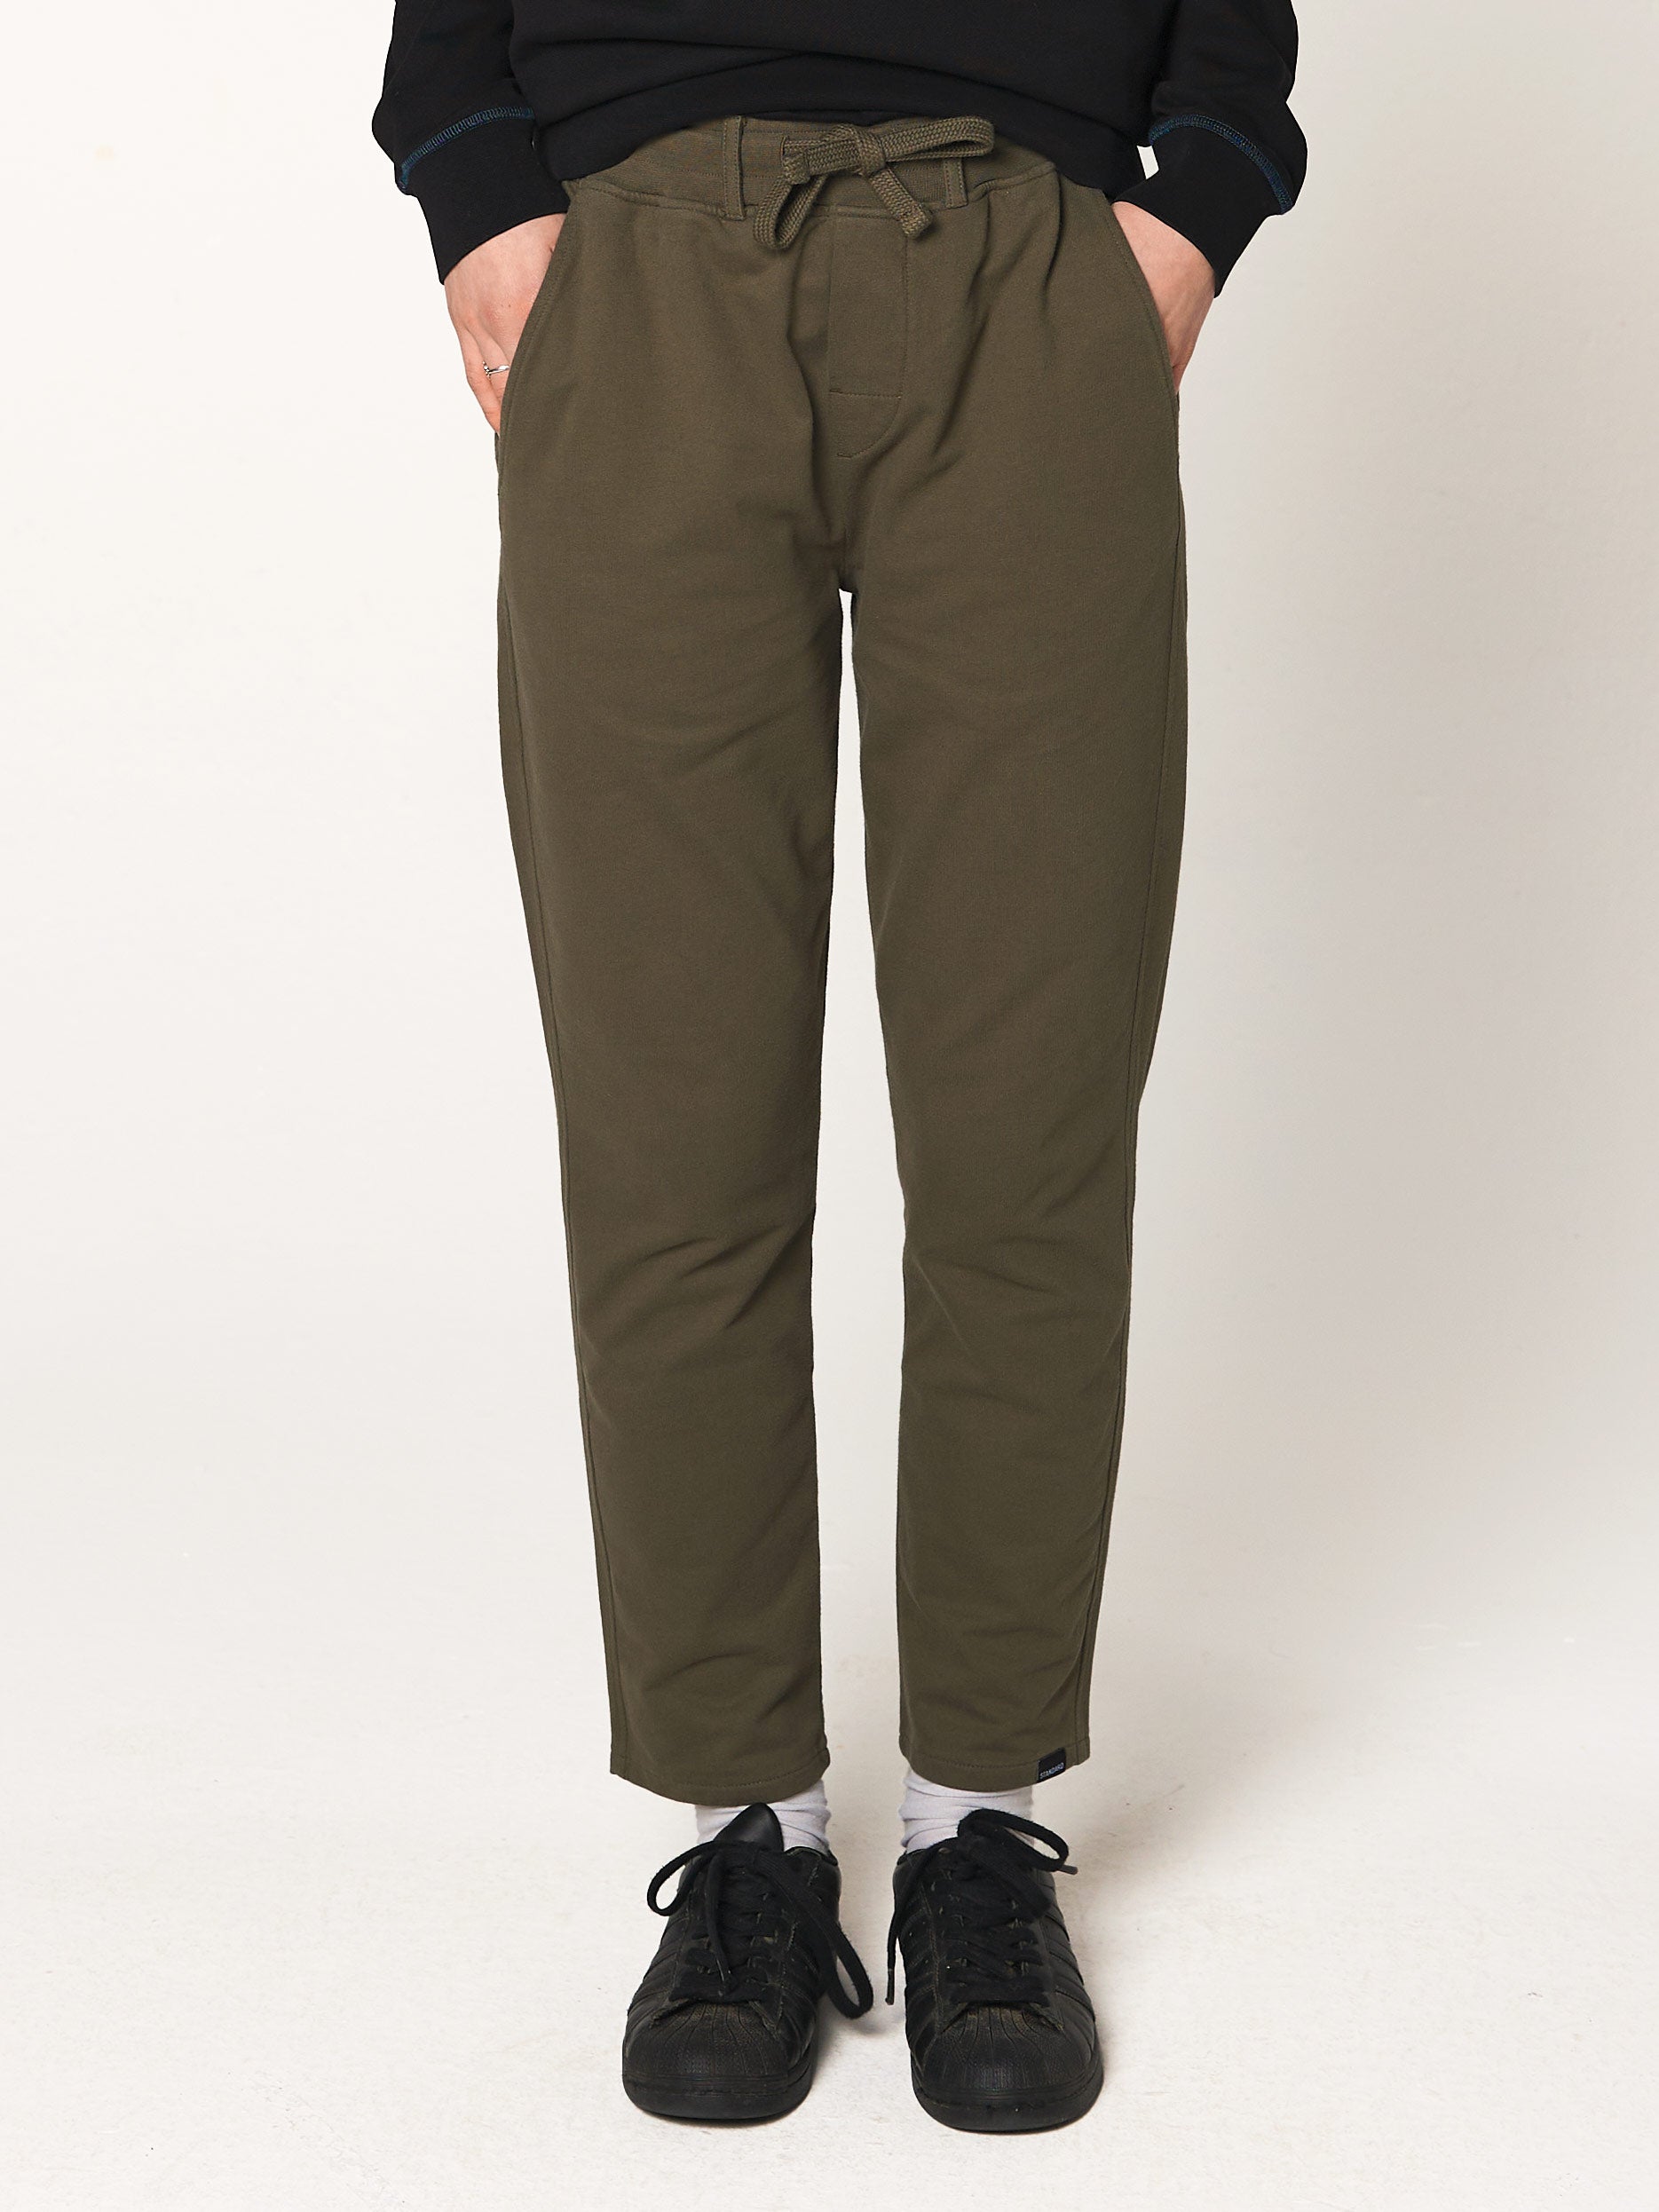 ITEM No. 21 – Chino leger Oliv - Standard Project